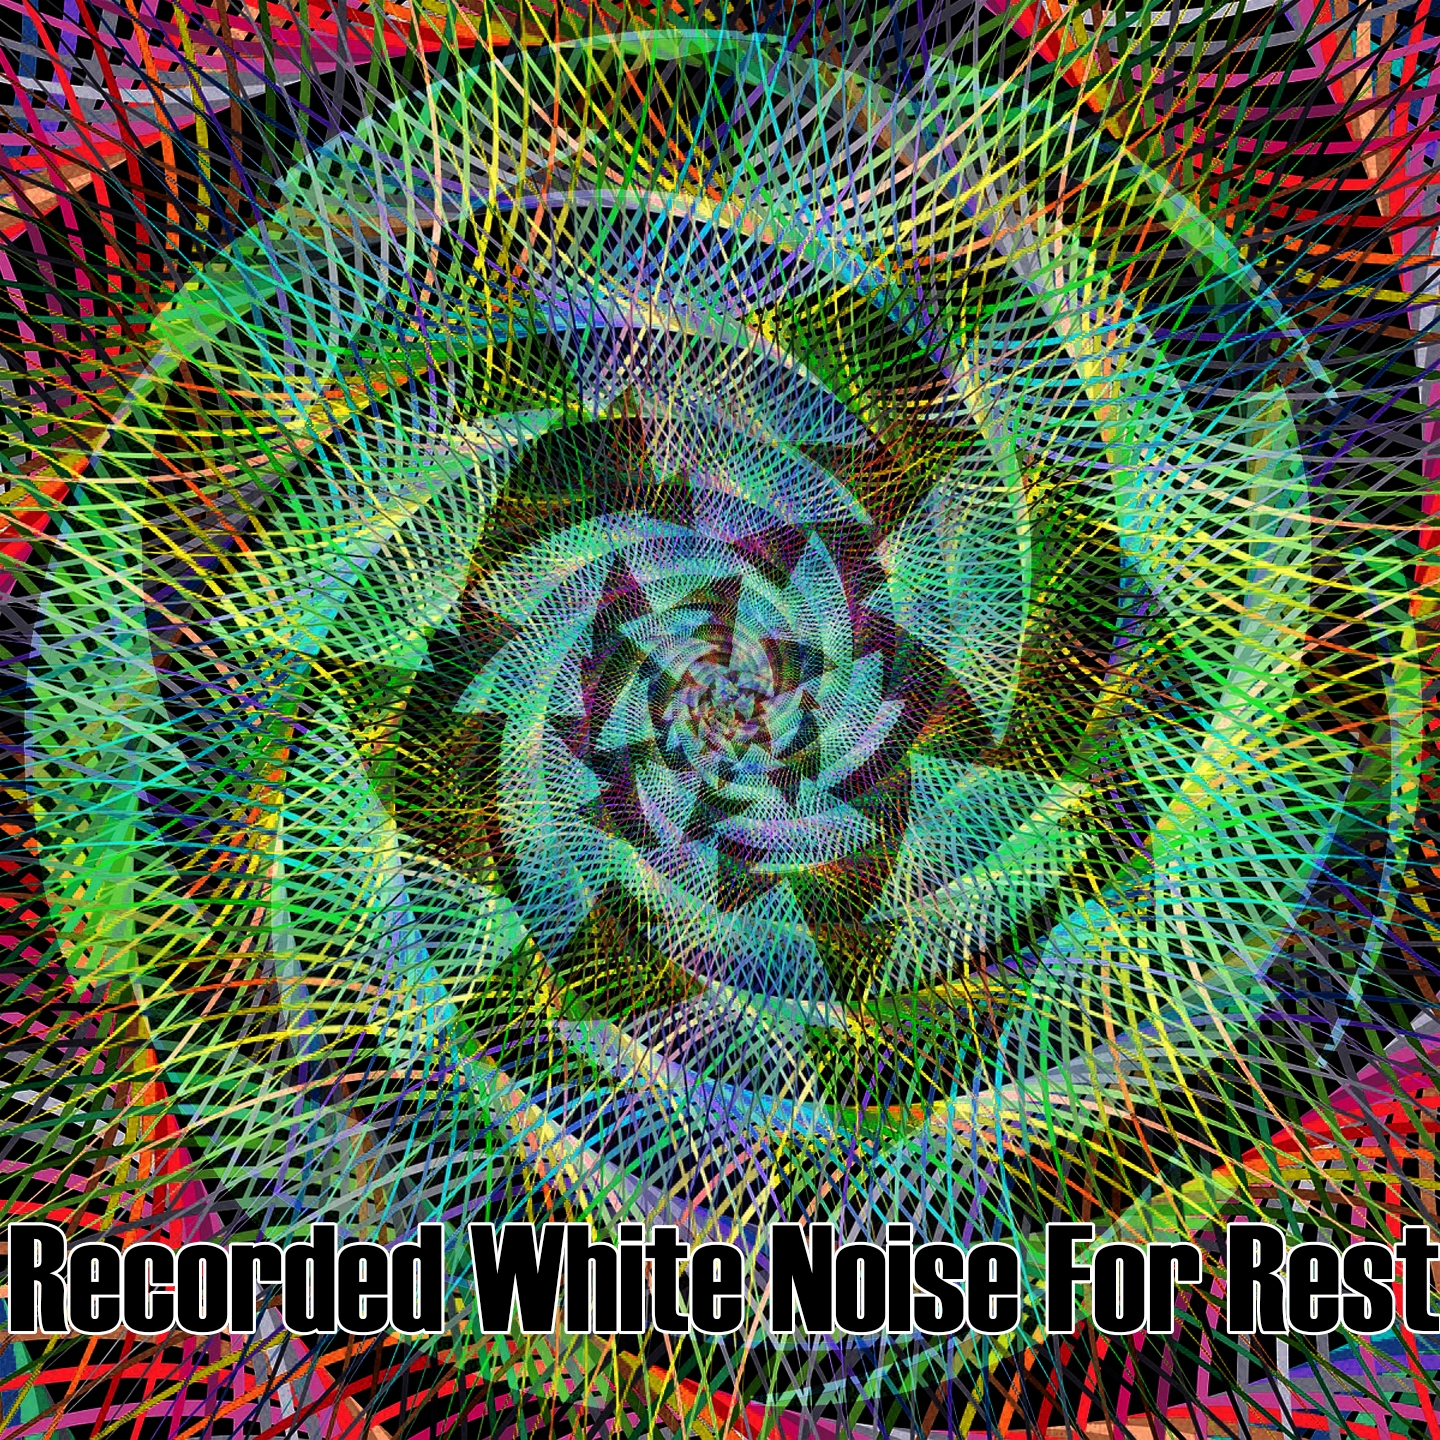 Recorded White Noise For Rest